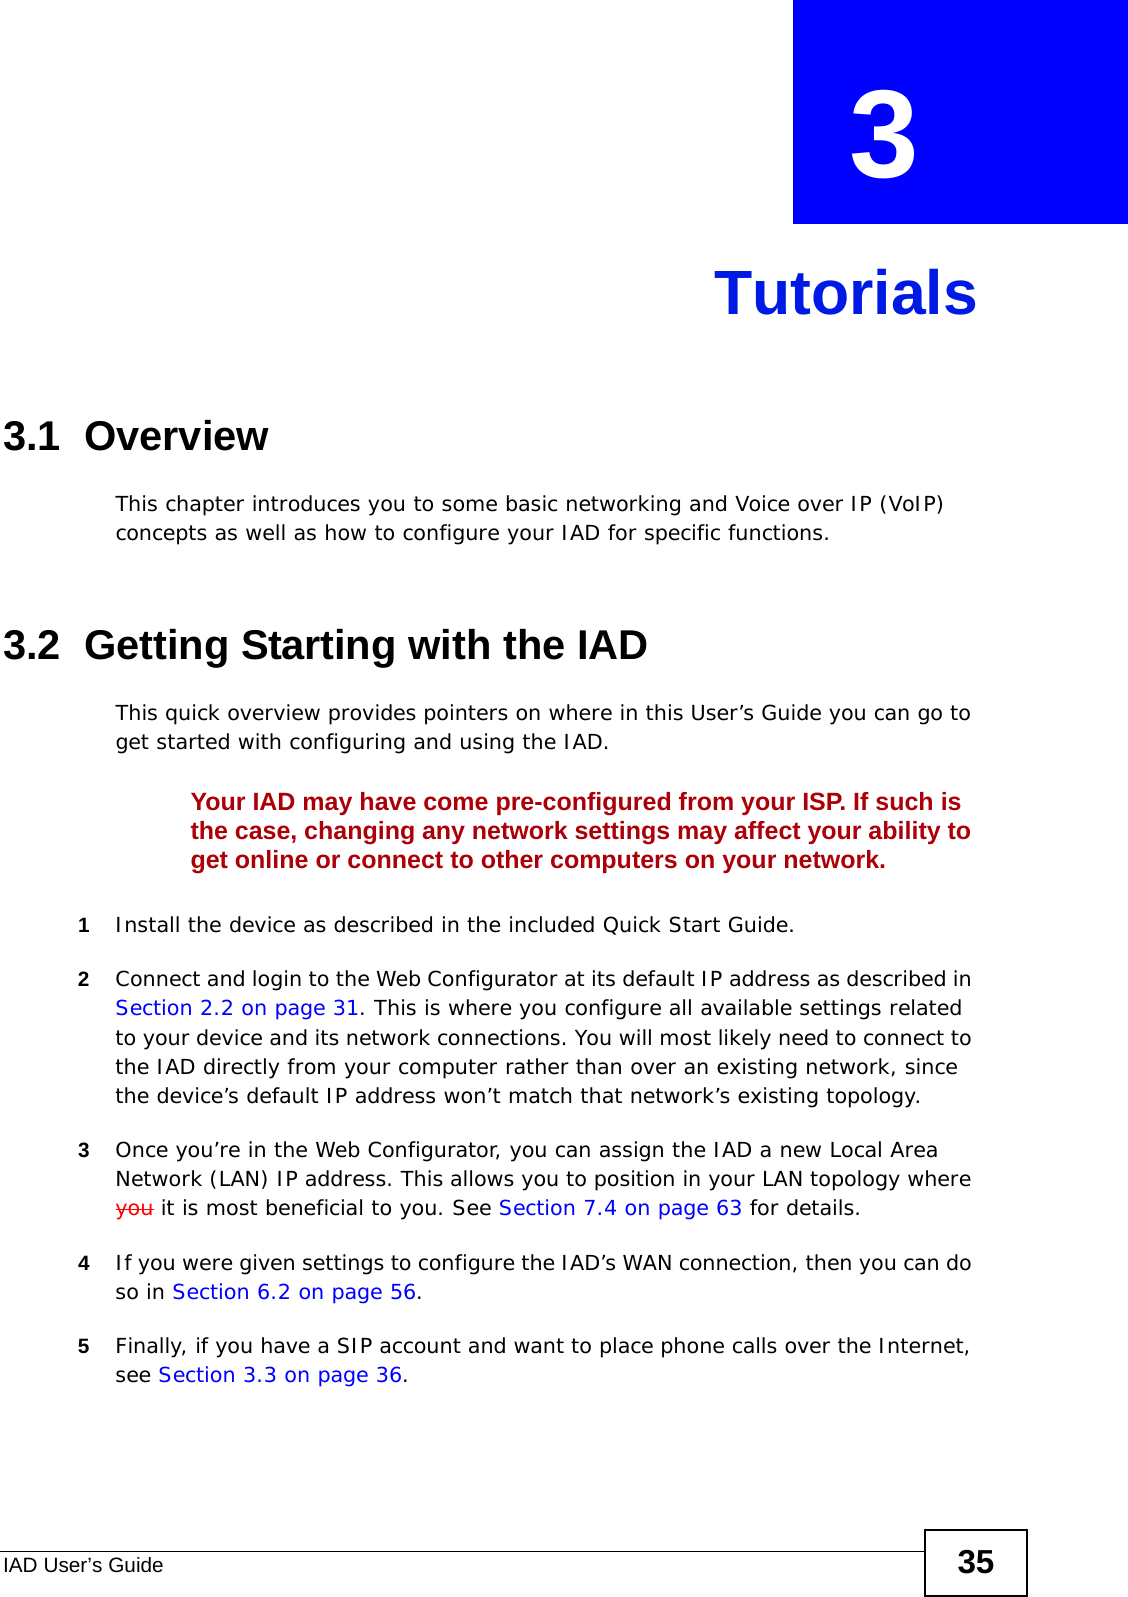 IAD User’s Guide 35CHAPTER  3 Tutorials3.1  OverviewThis chapter introduces you to some basic networking and Voice over IP (VoIP) concepts as well as how to configure your IAD for specific functions.3.2  Getting Starting with the IADThis quick overview provides pointers on where in this User’s Guide you can go to get started with configuring and using the IAD.Your IAD may have come pre-configured from your ISP. If such is the case, changing any network settings may affect your ability to get online or connect to other computers on your network.1Install the device as described in the included Quick Start Guide.2Connect and login to the Web Configurator at its default IP address as described in Section 2.2 on page 31. This is where you configure all available settings related to your device and its network connections. You will most likely need to connect to the IAD directly from your computer rather than over an existing network, since the device’s default IP address won’t match that network’s existing topology.3Once you’re in the Web Configurator, you can assign the IAD a new Local Area Network (LAN) IP address. This allows you to position in your LAN topology where you it is most beneficial to you. See Section 7.4 on page 63 for details.4If you were given settings to configure the IAD’s WAN connection, then you can do so in Section 6.2 on page 56.5Finally, if you have a SIP account and want to place phone calls over the Internet, see Section 3.3 on page 36.